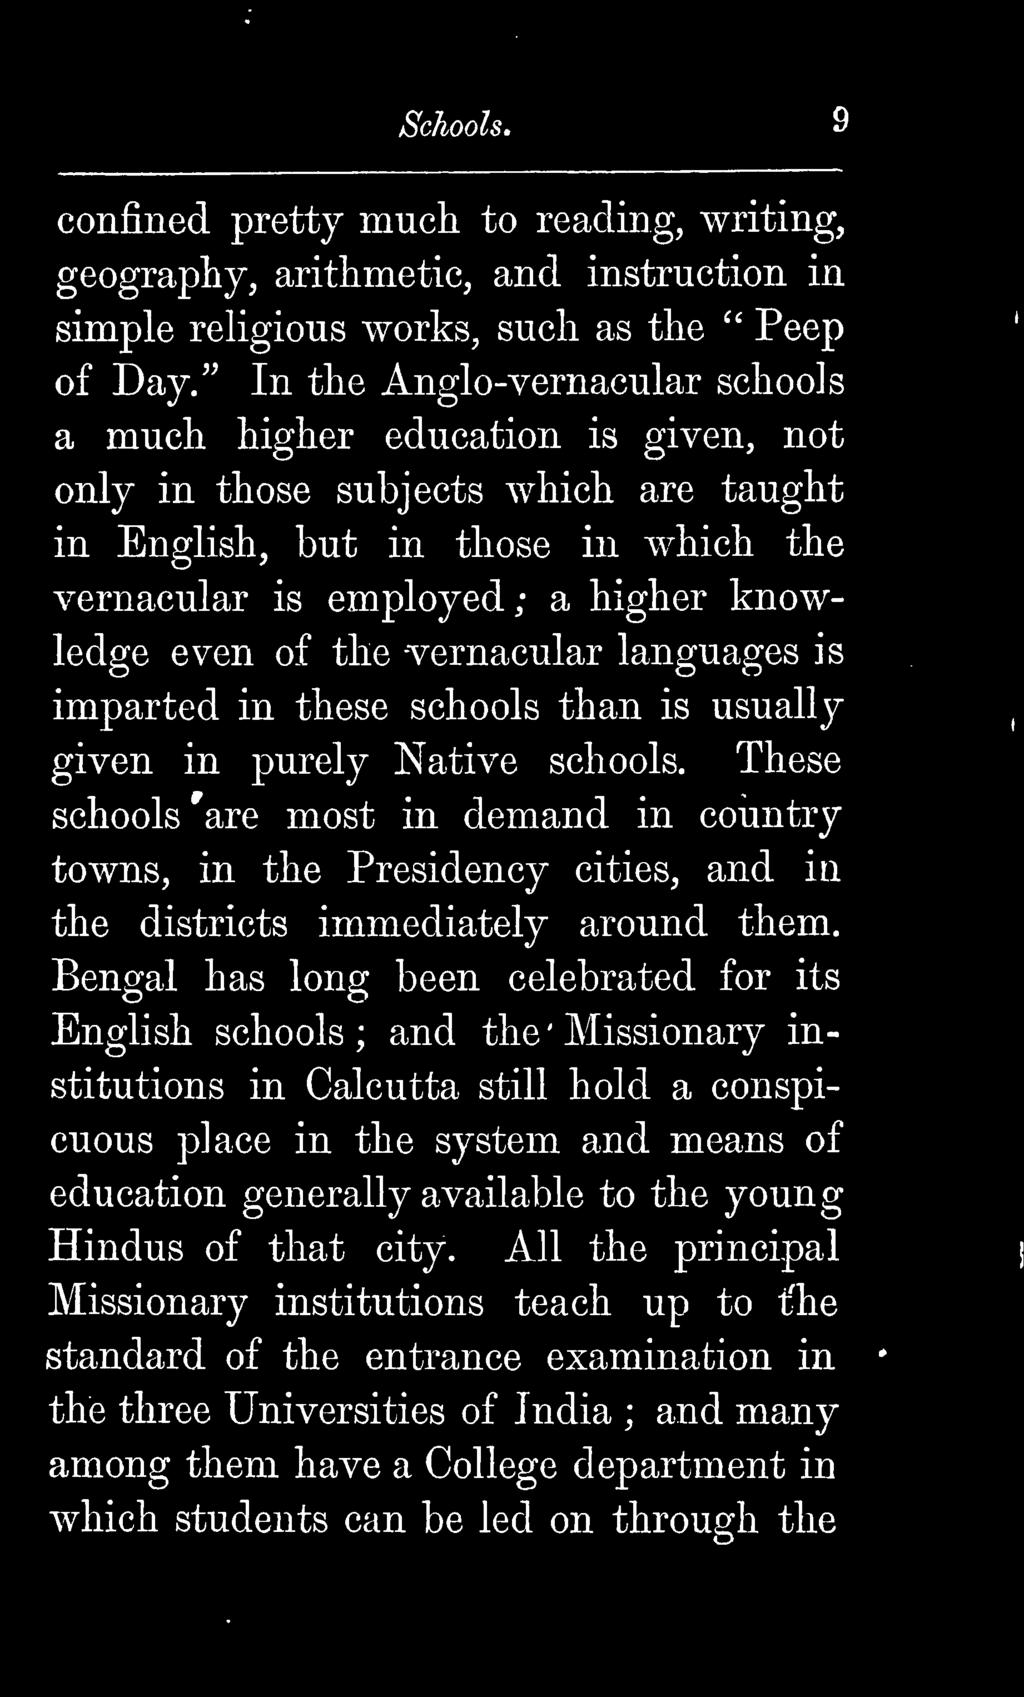 of the vernacular languages is imparted in these schools than is usually given in purely Native schools.